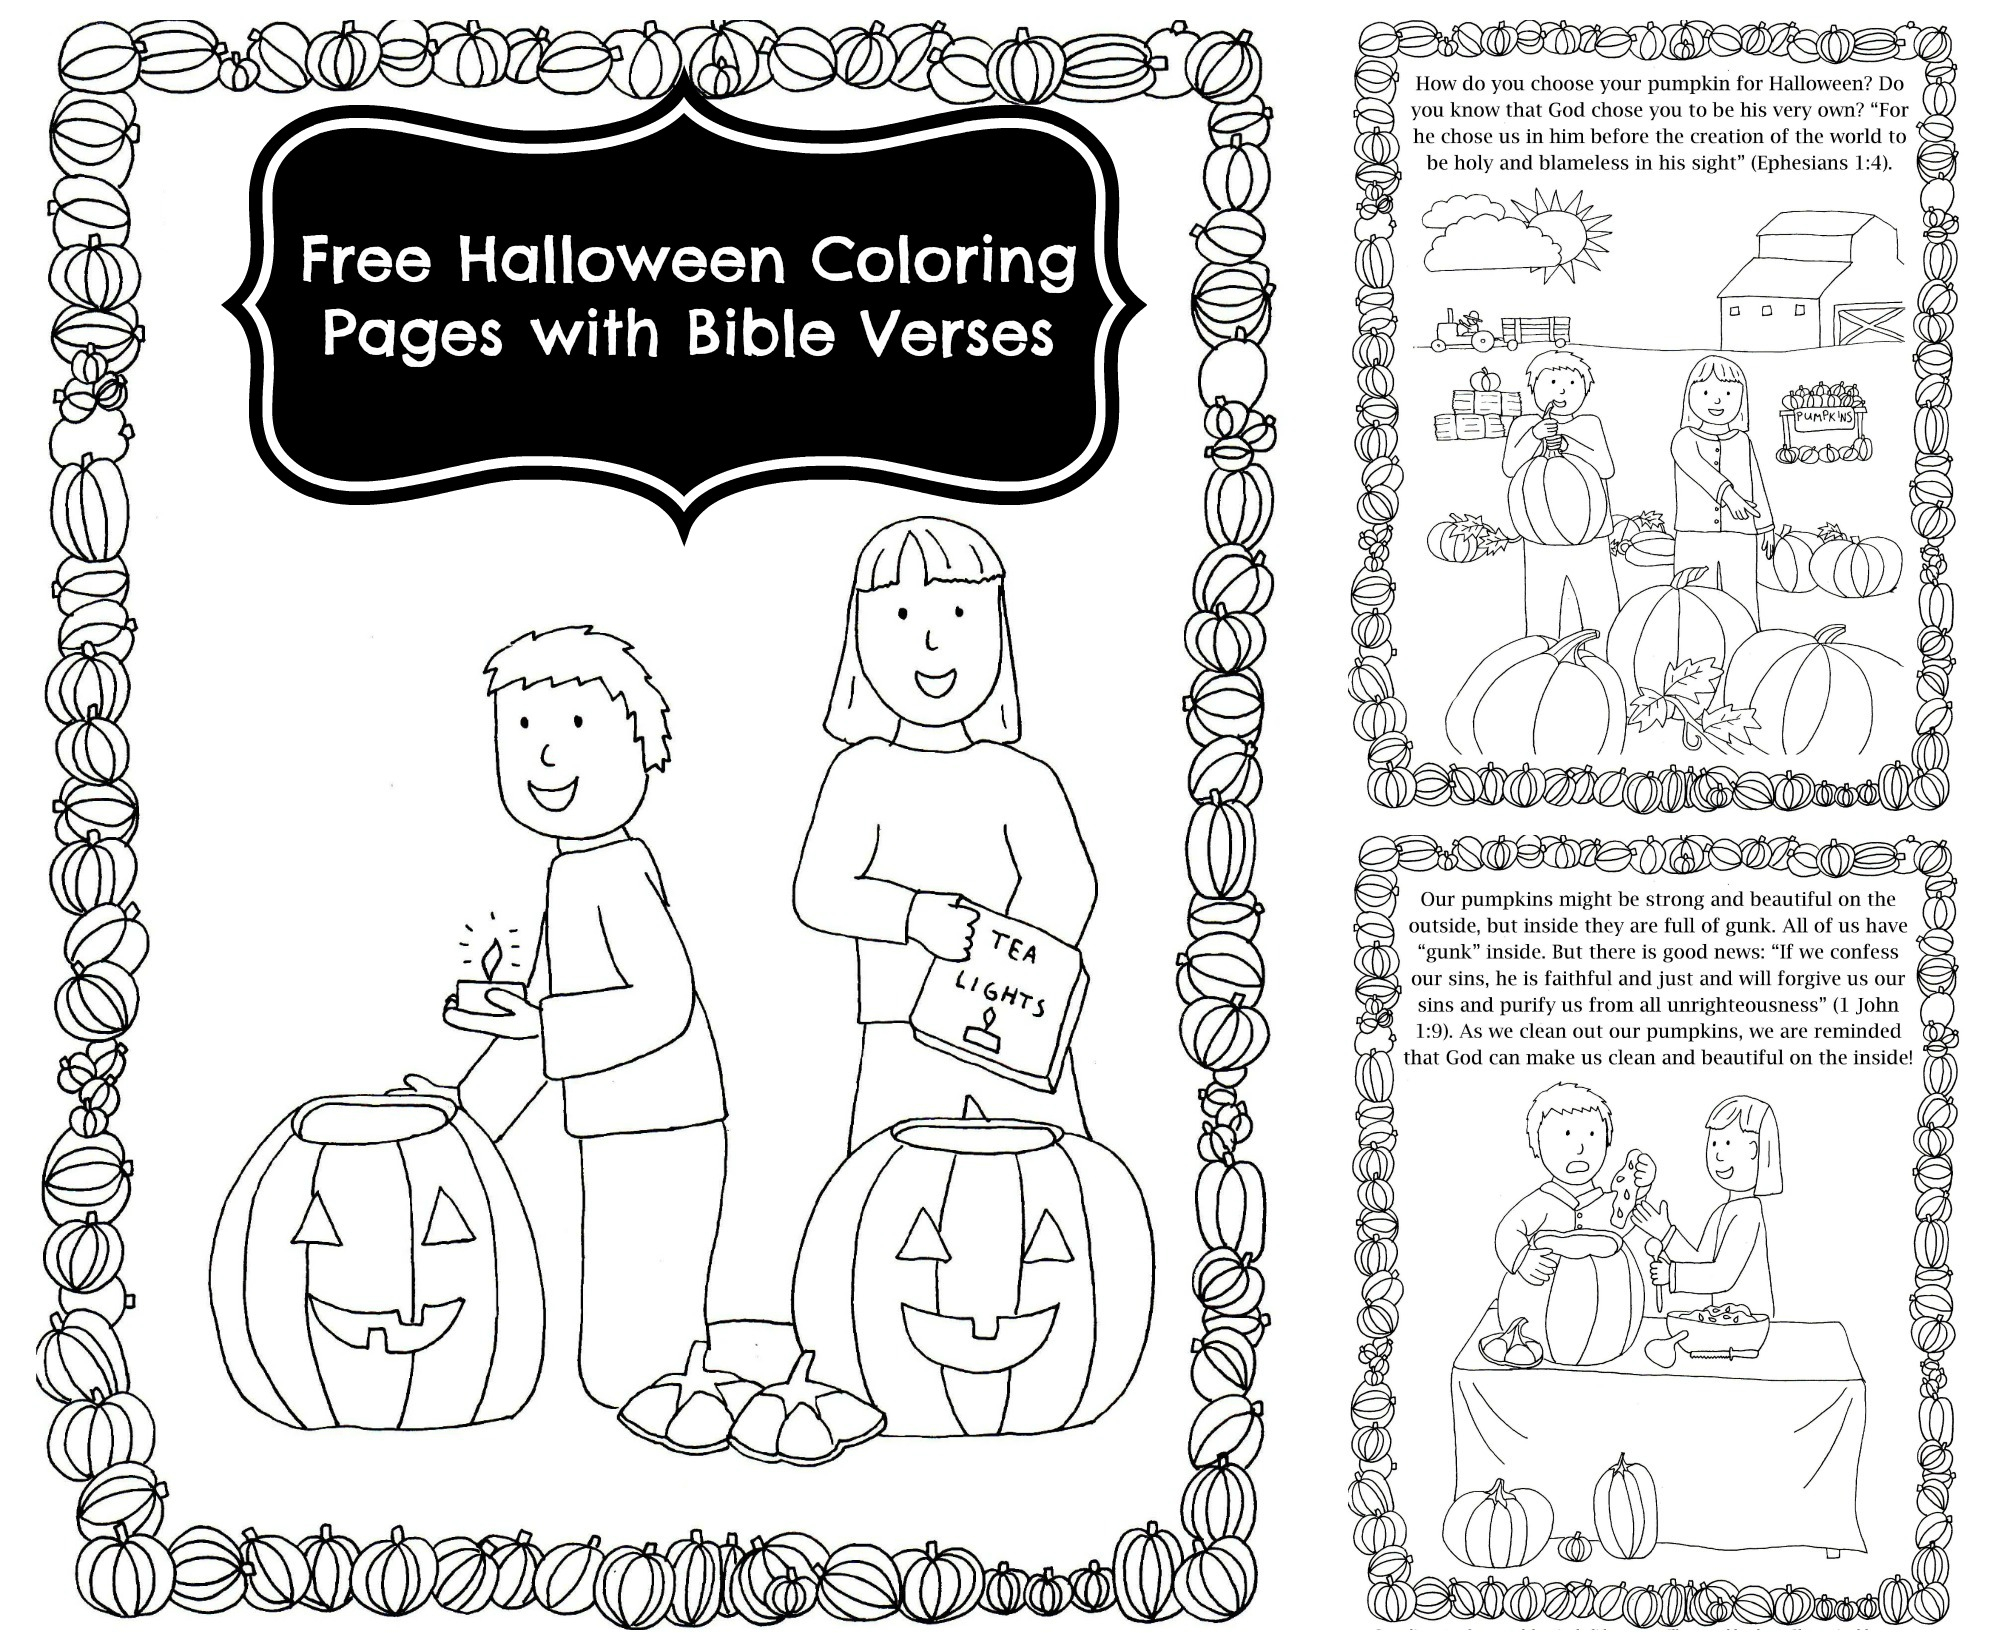 The Church Began Coloring Page Coloring Pages With Bible Verses For Halloween Celebrating Holidays